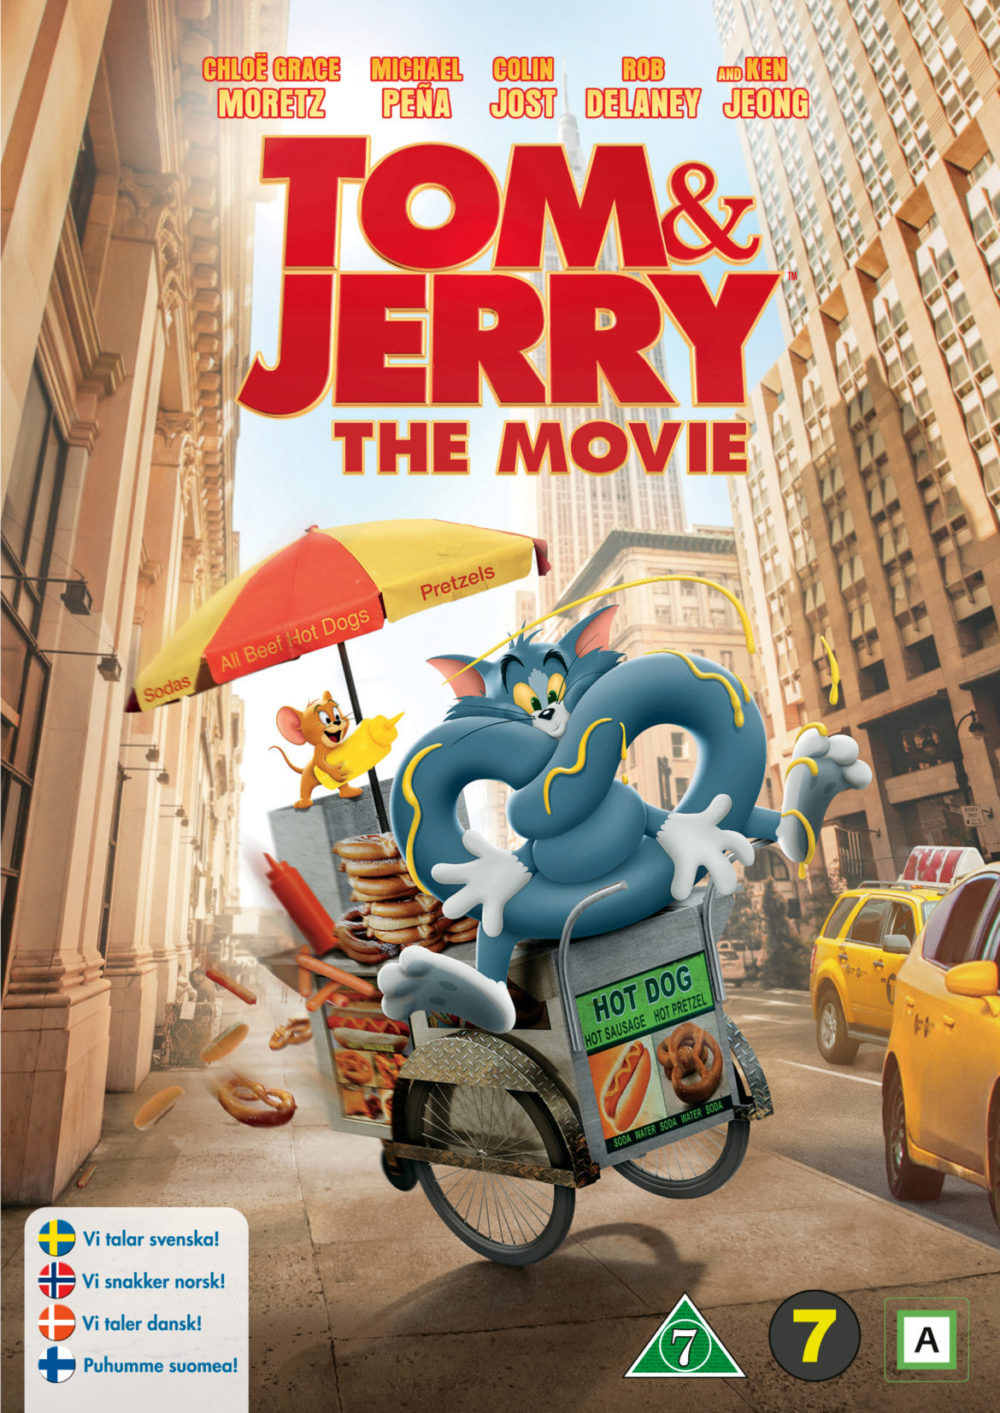 Foto: Copyright 2021 - Warner Bros / SF Studios - Tom and Jerry - The Movie - poster.